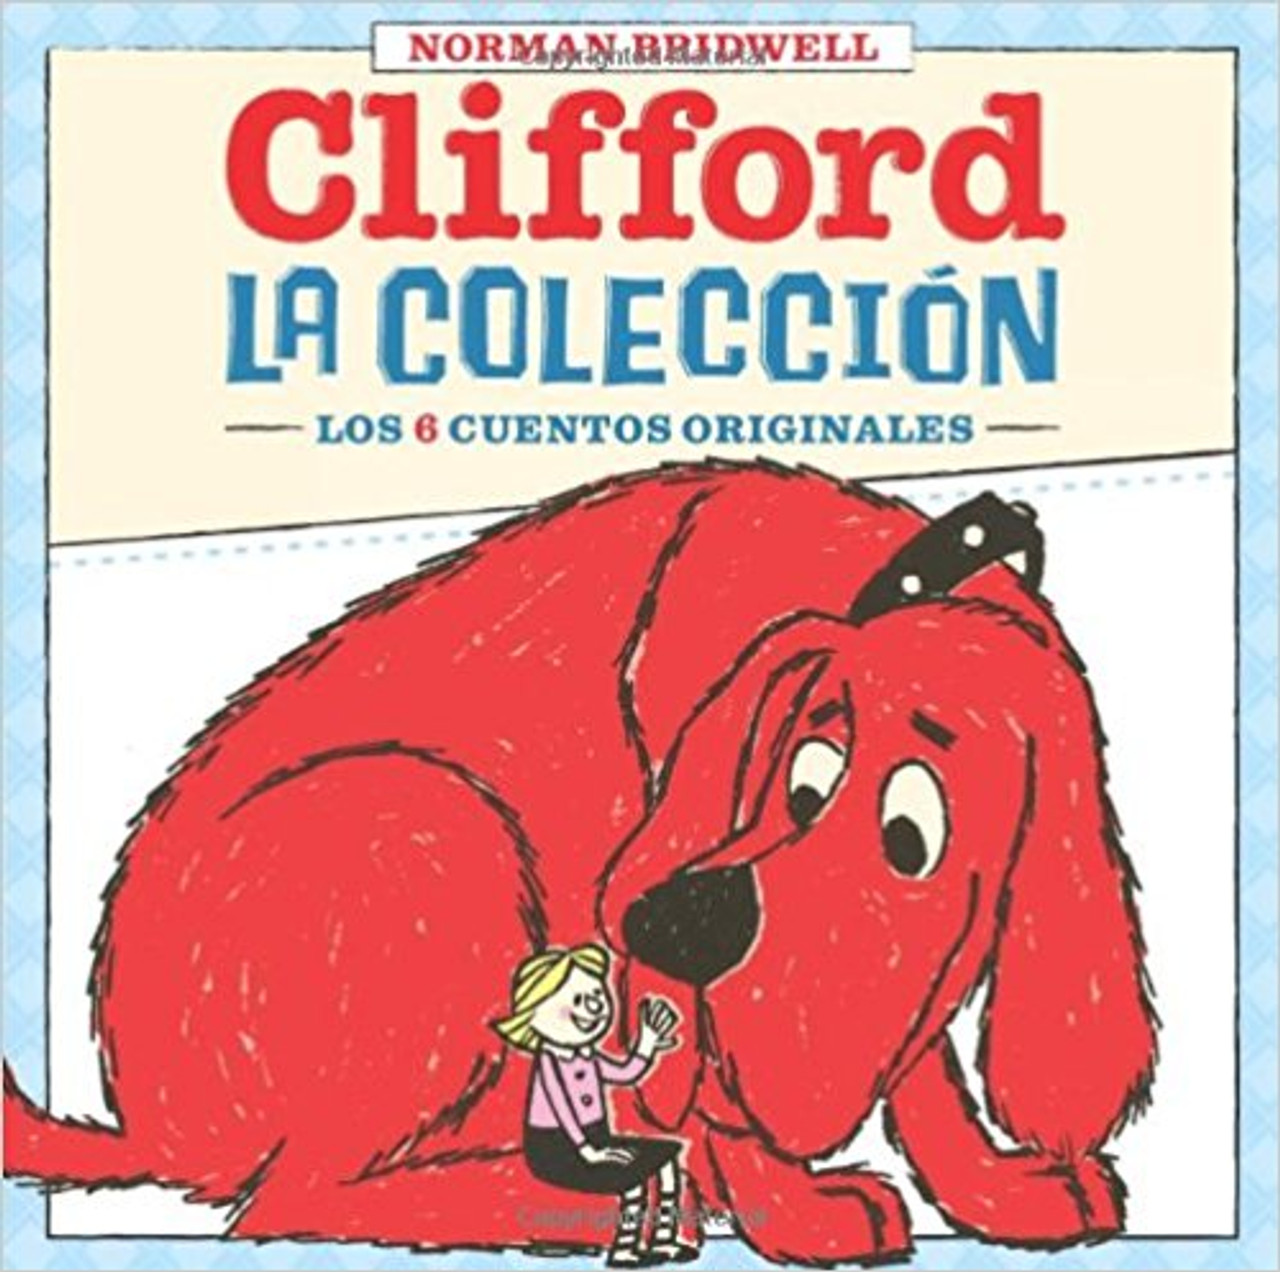 Includes the original 6 stories, an original letter from Norman Bridwell to the reader, information about the creation of Clifford including an image of Norman's 1962 painting that inspired the Clifford series, the story behind the real Emily Elizabeth, and more.